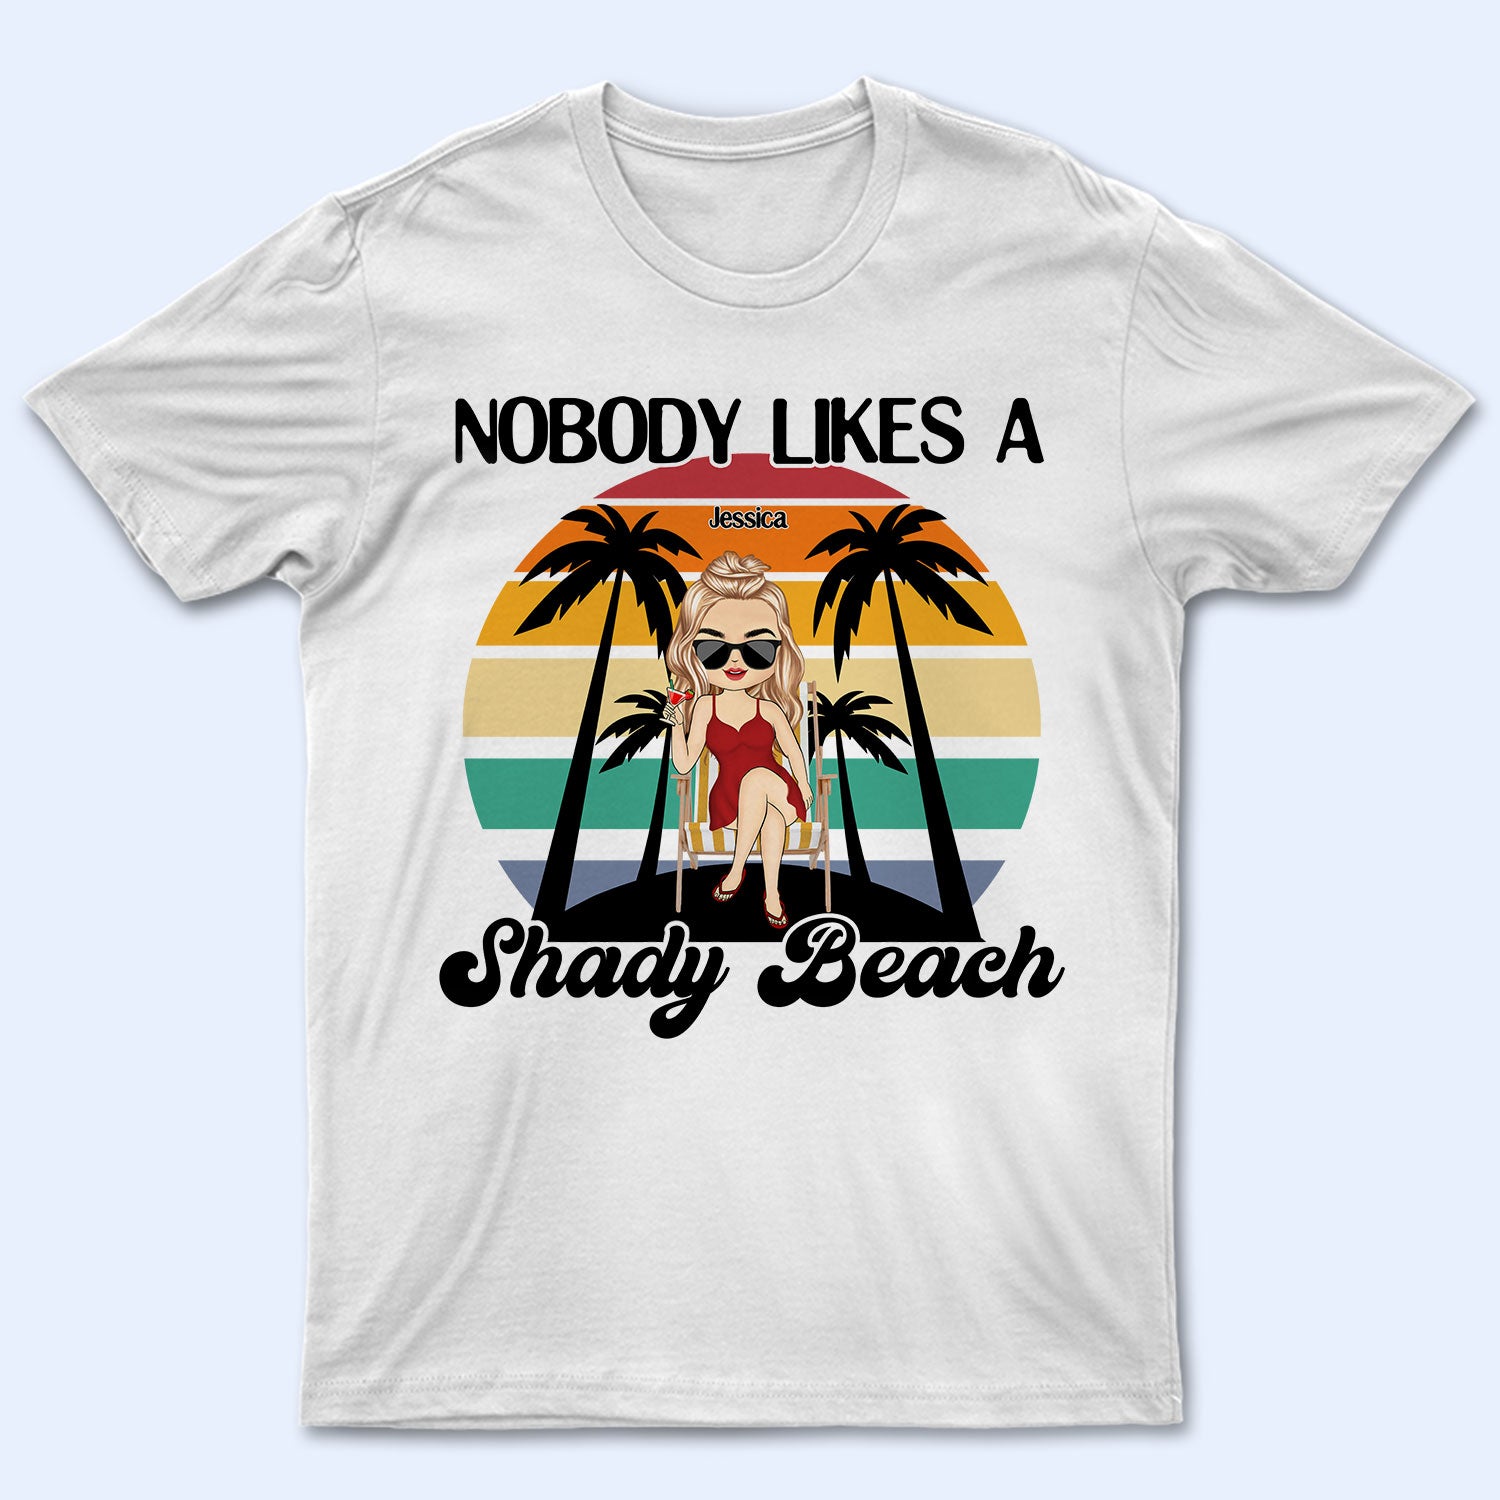 Nobody Likes A Shady Beach - Summer Gift For Him, Her, Yourself, Girlfriend, Boyfriend, BFF Best Friends, Traveling Lovers - Personalized Custom T Shirt